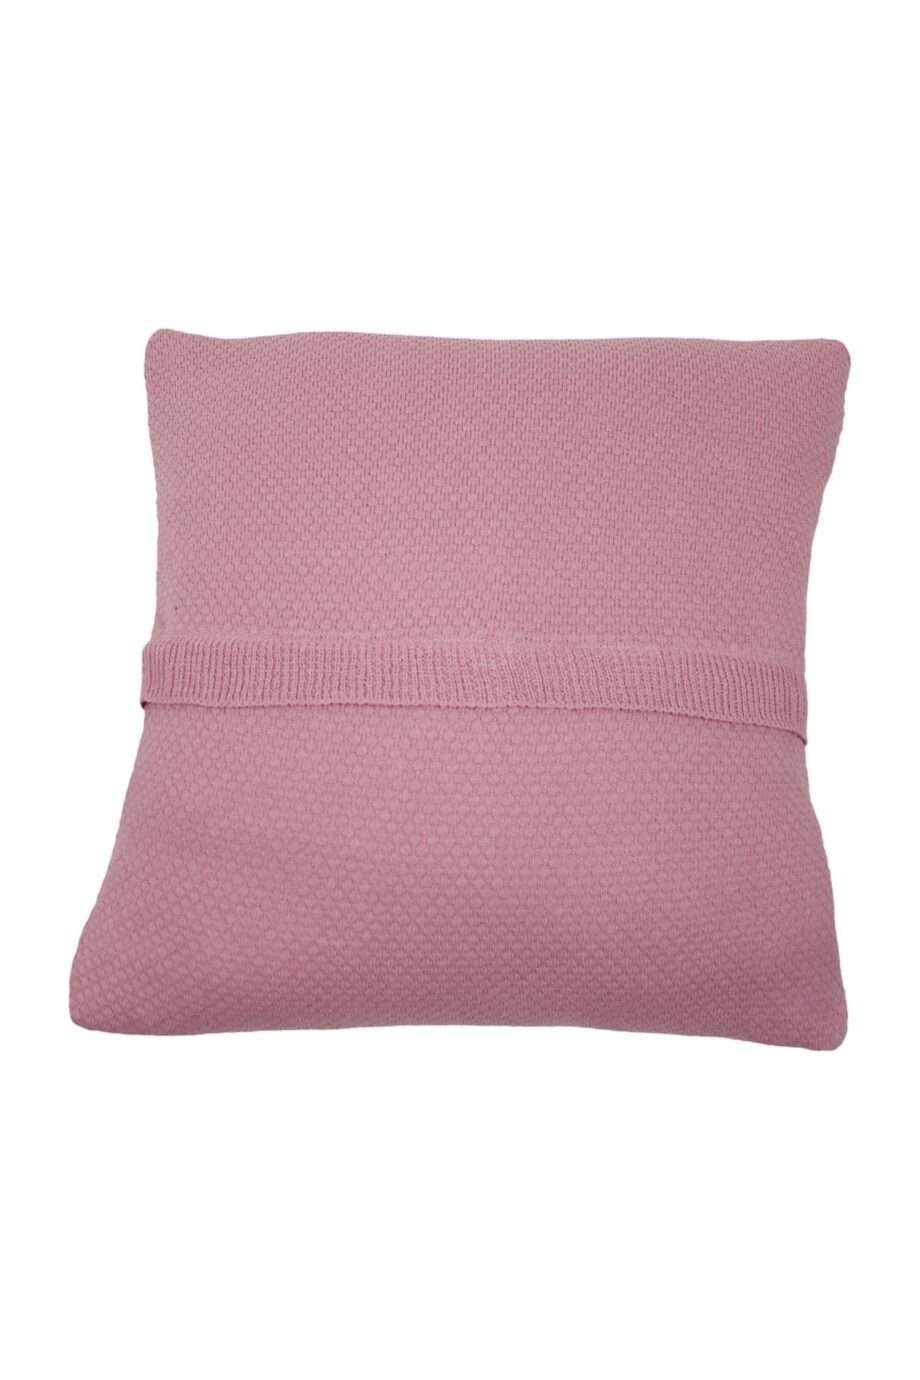 liz old rose knitted cotton pillowcase xsmall